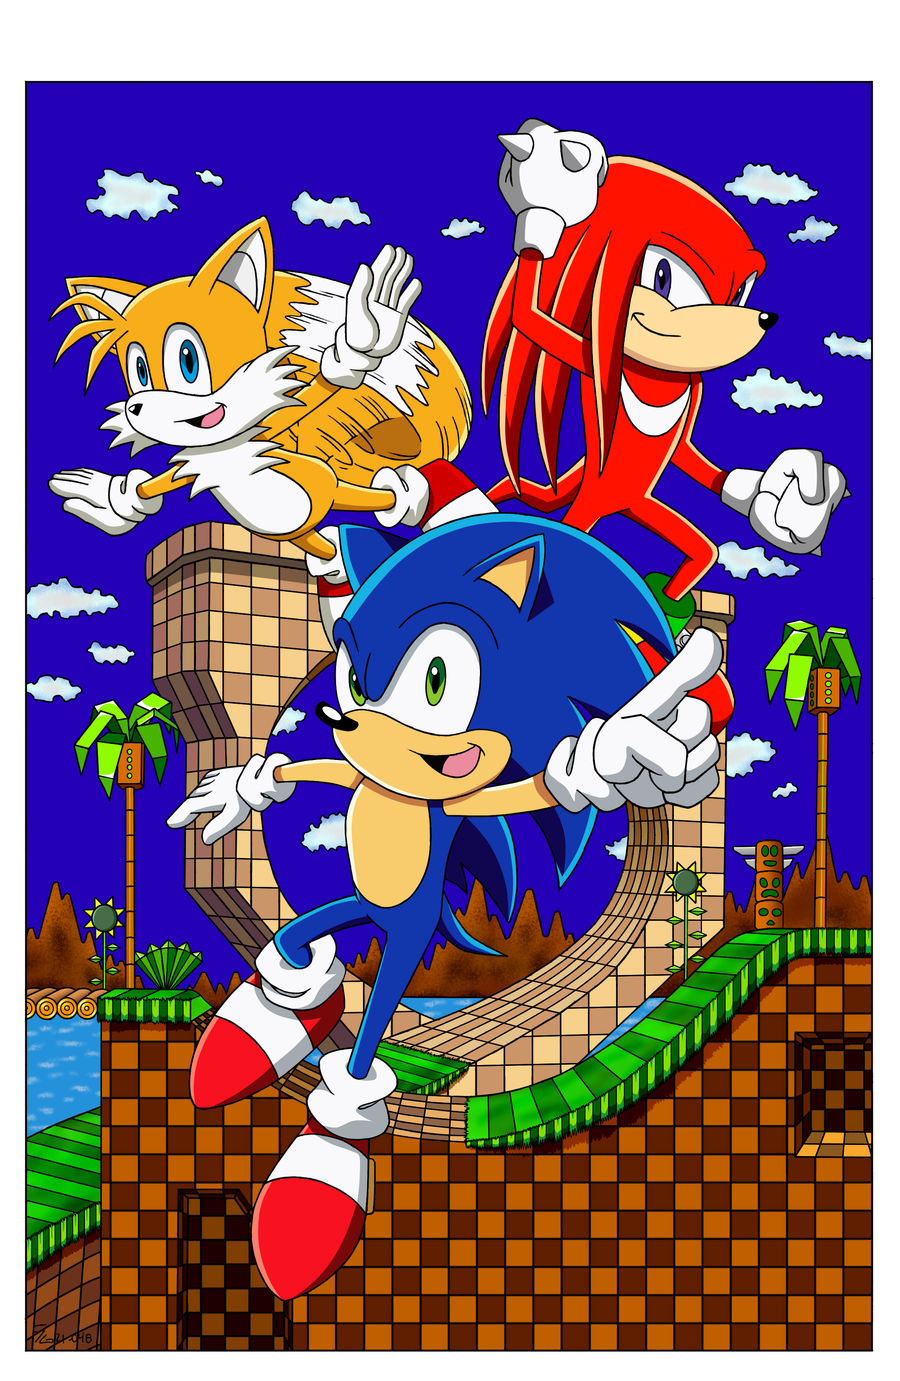 The Classic Sonic The Hedgehog years from Sonic The Hedgehog (1991) to Sonic  Mania (2017).